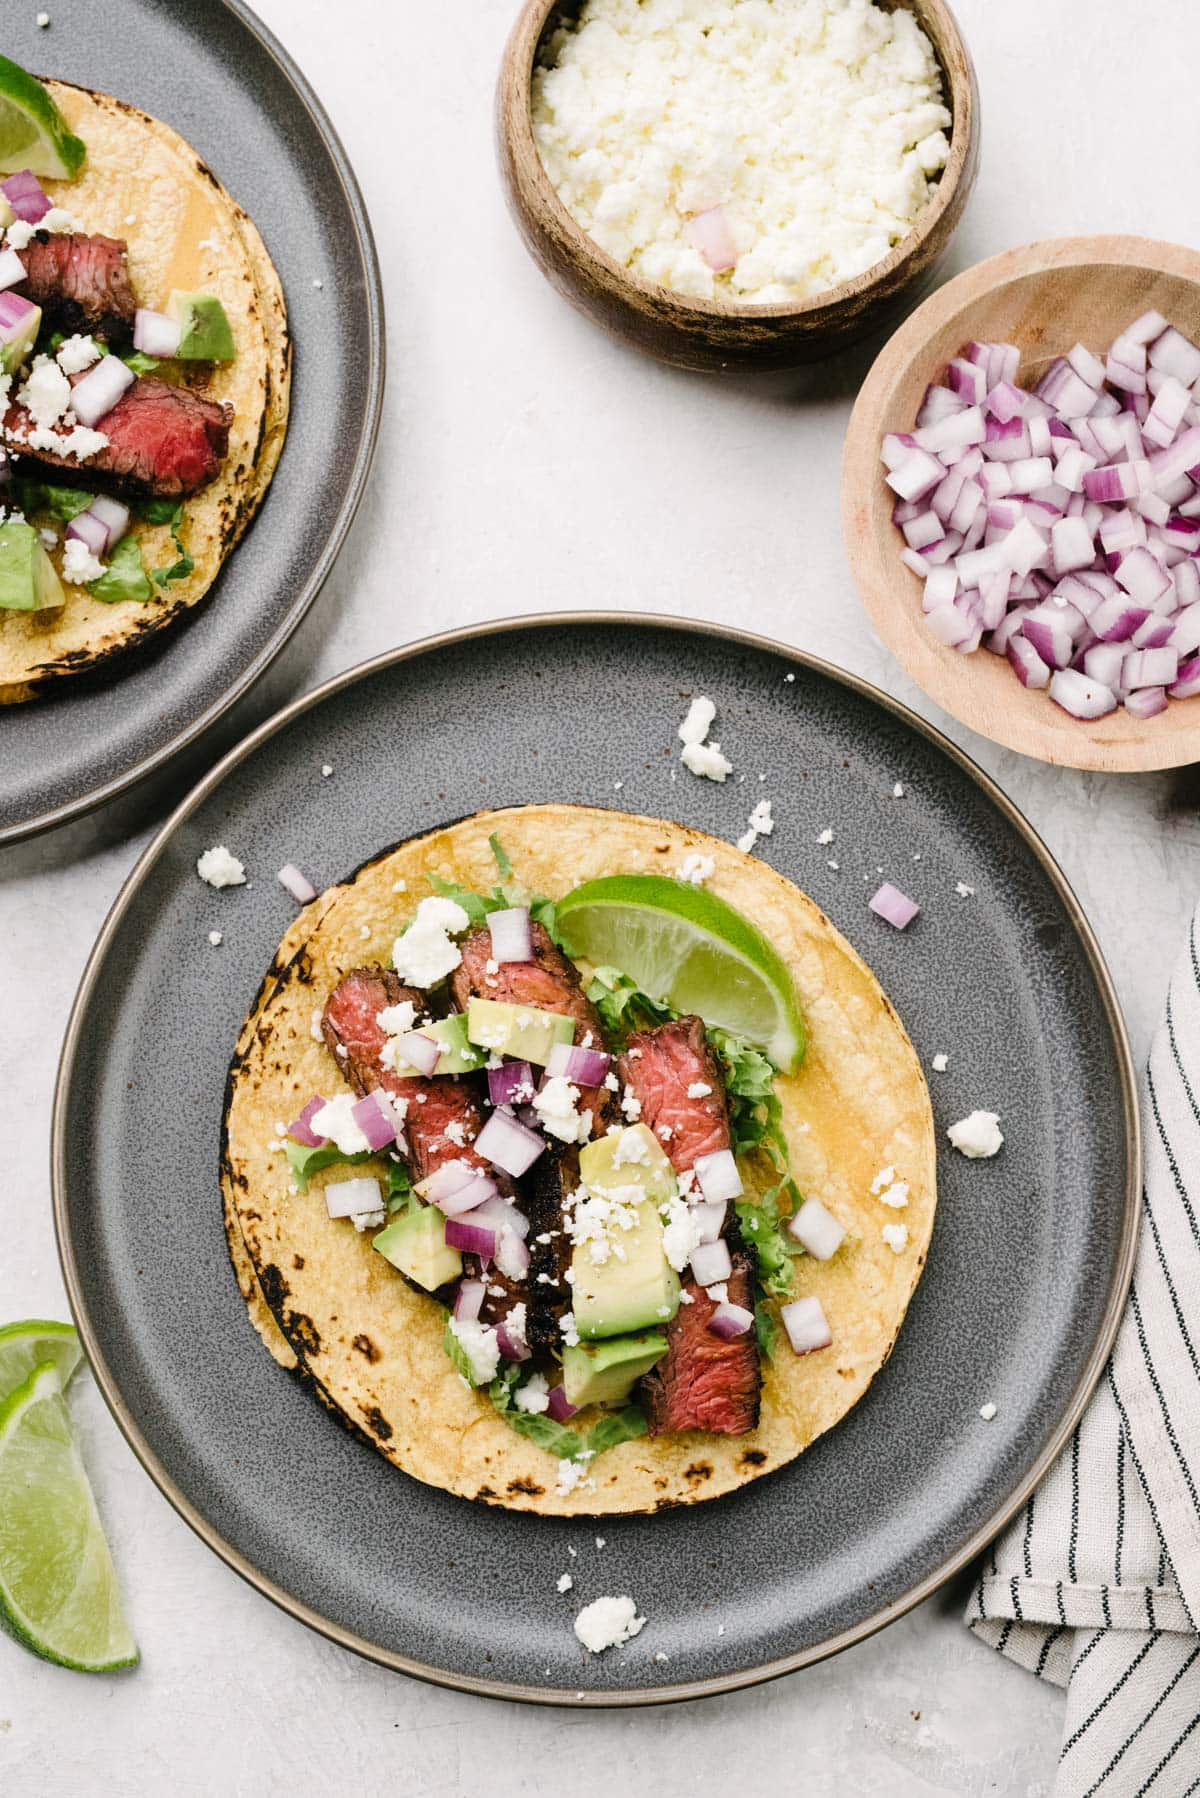 A skirt steak taco in a corn tortilla on a dark grey plate, topped with avocado, red onion, and queso fresco; the plate is surrounded by a striped linen napkin and small bowls of taco toppings.